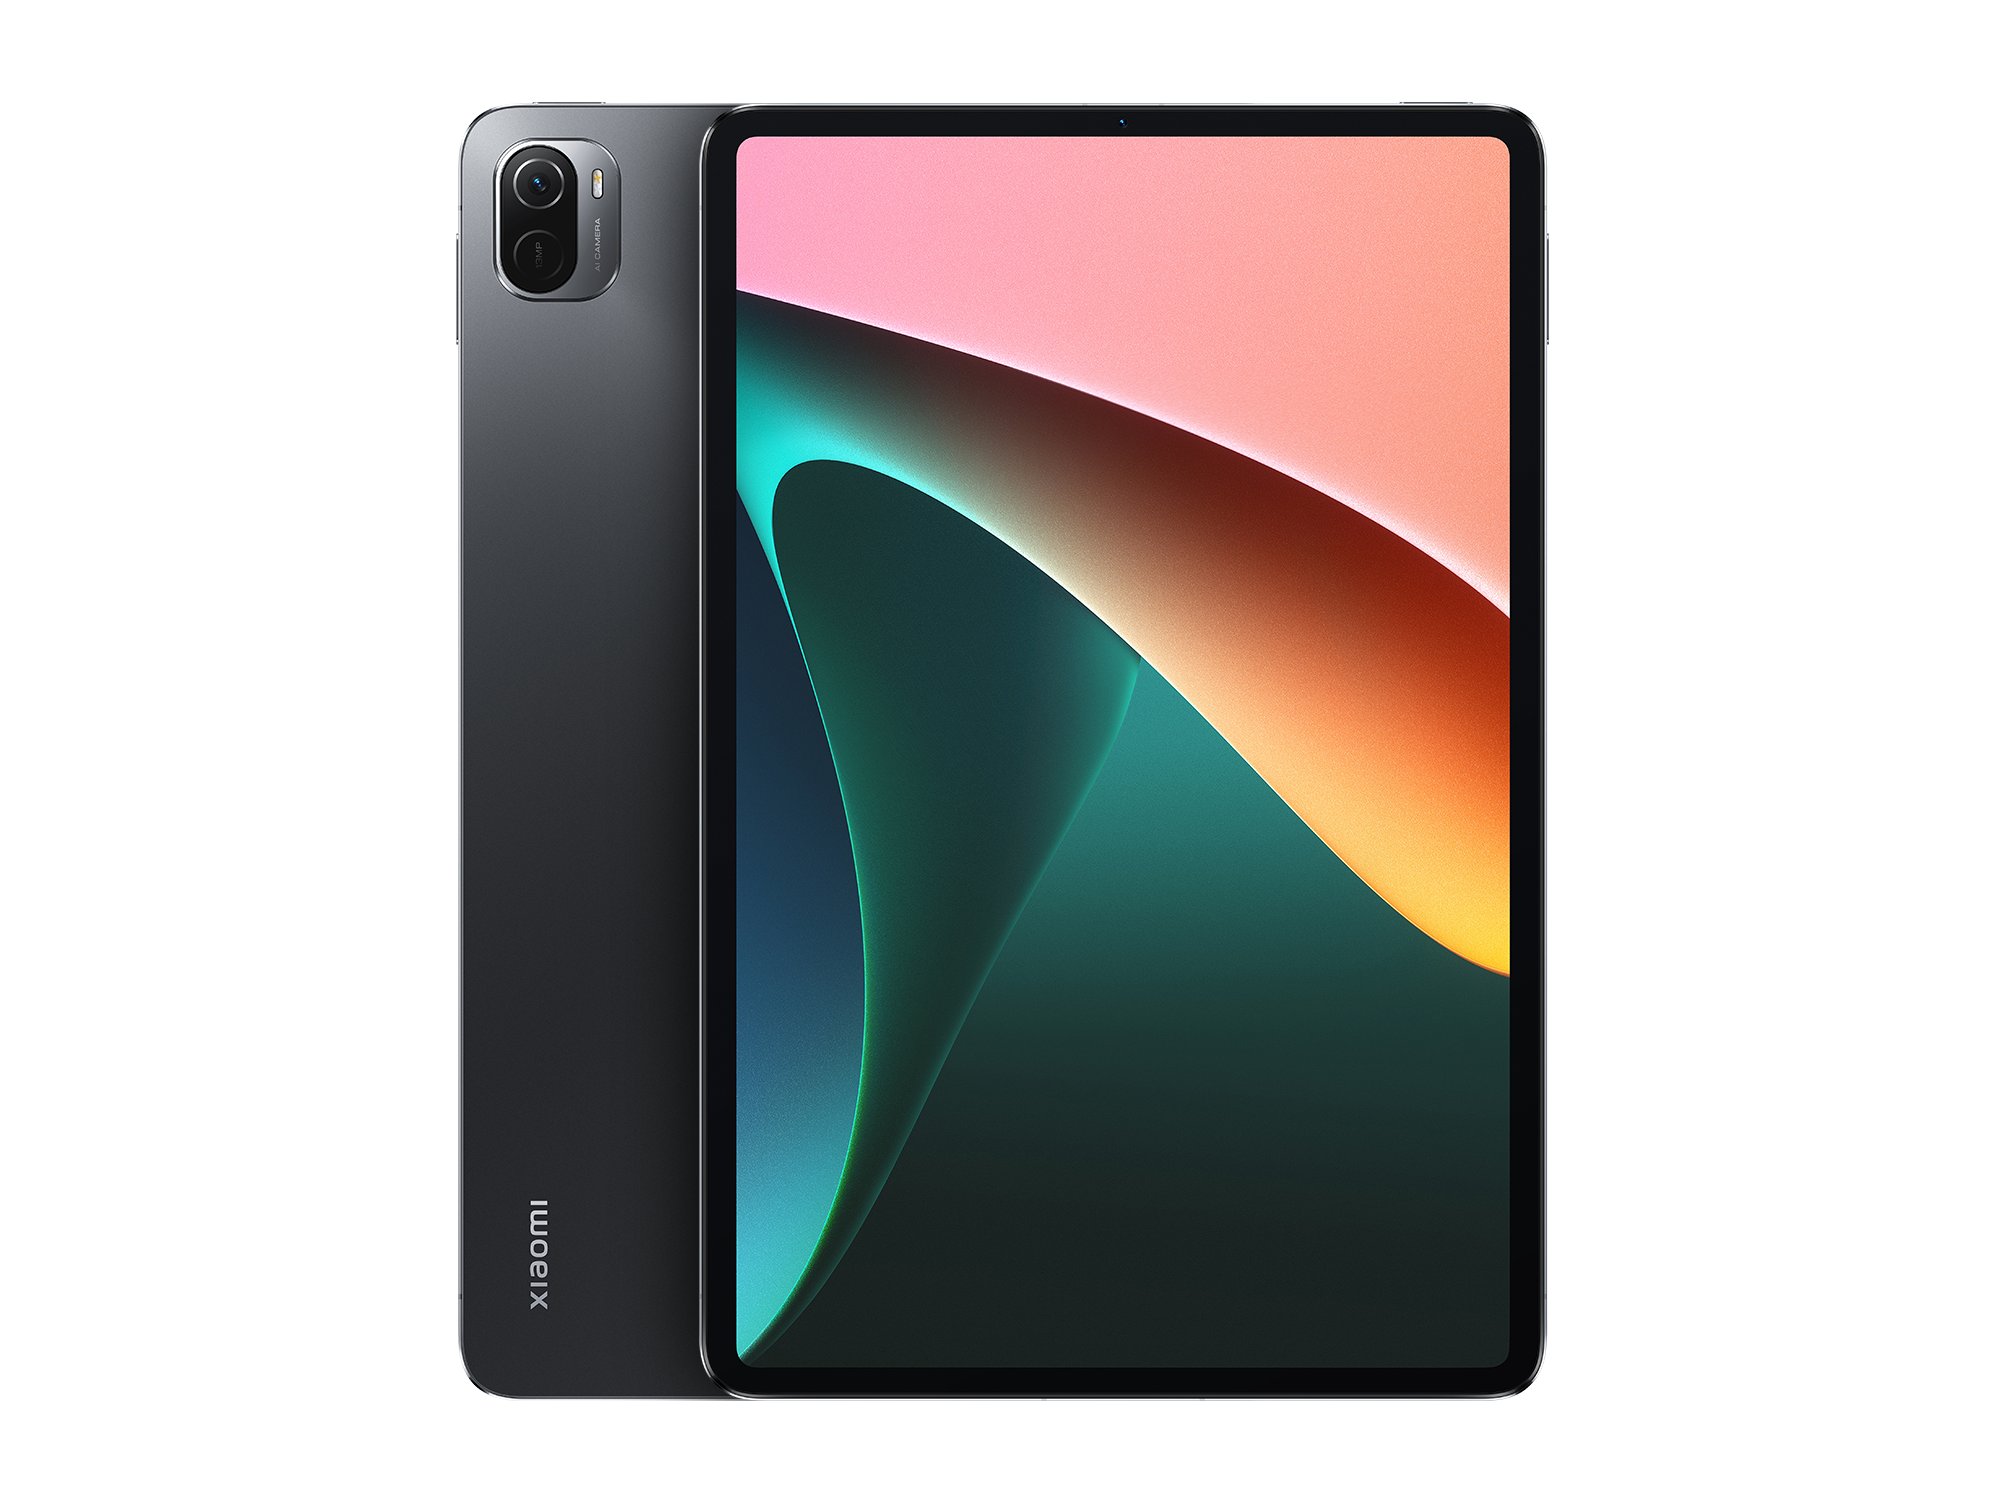  The image shows the Xiaomi Redmi Pad Pro 5G, a tablet with a 12.1-inch 2.5K LCD display with a 120Hz refresh rate, Dolby Vision, and Corning Gorilla Glass 3 protection.